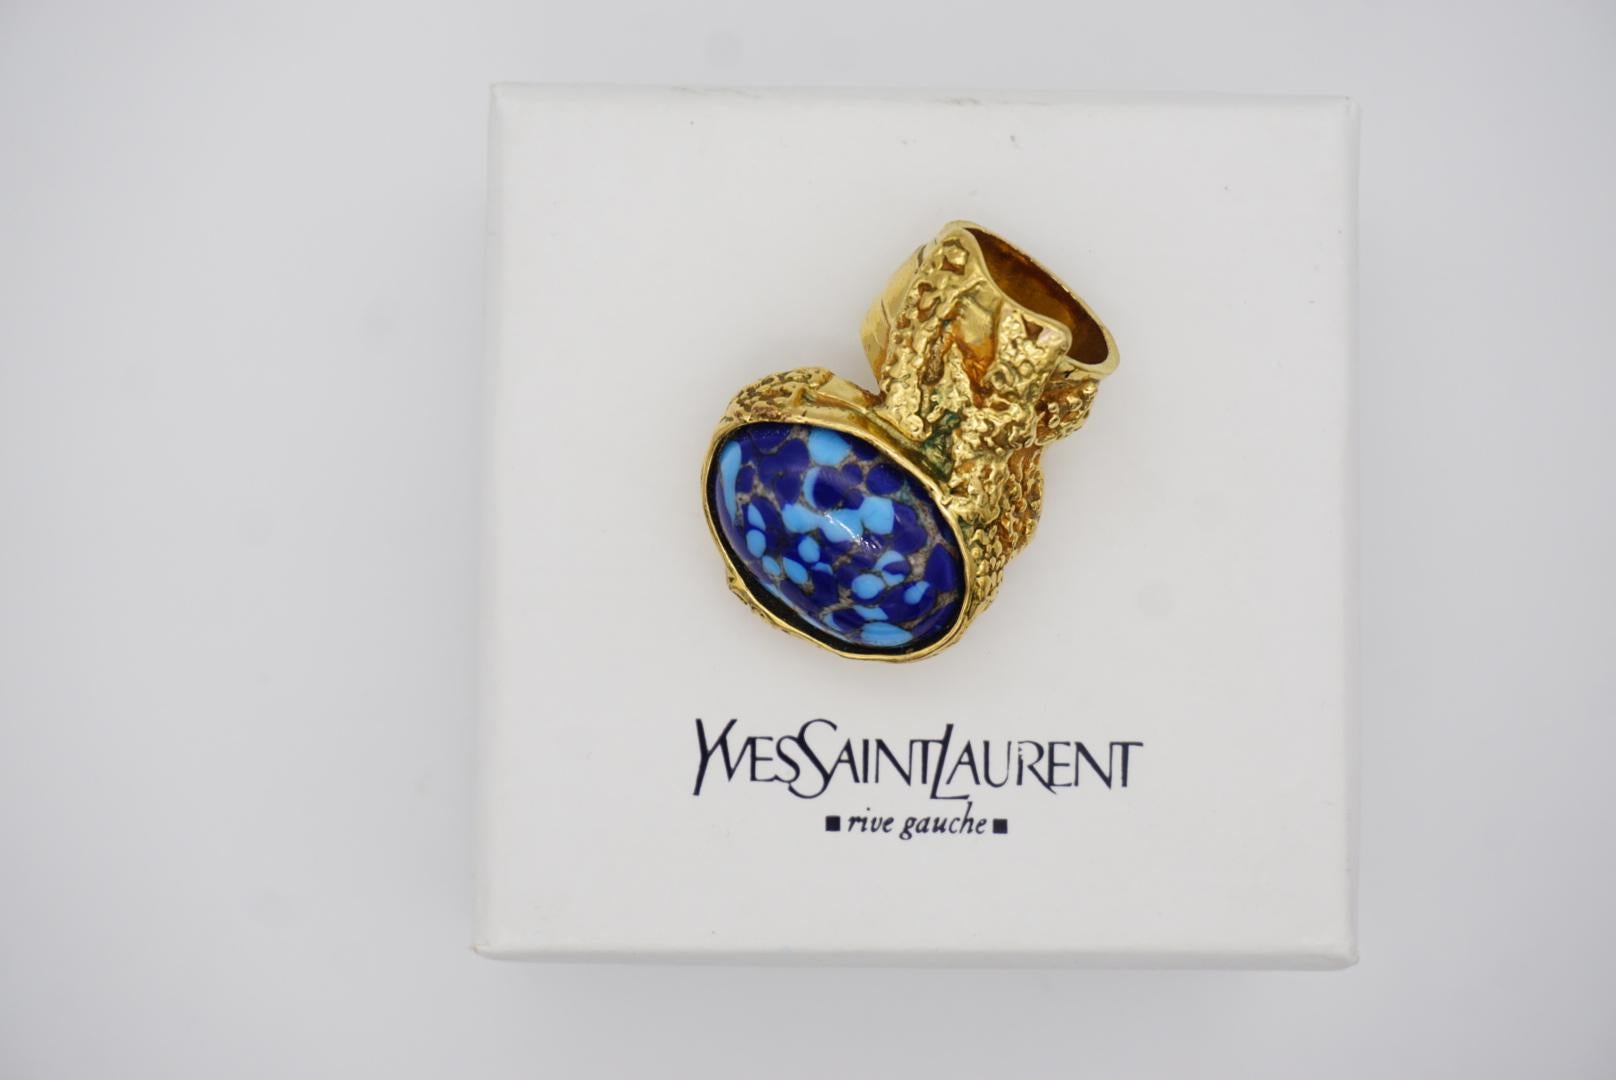 Yves Saint Laurent YSL Arty Navy Blue Dots Mosaic Statement Gold Ring, Size 5 2